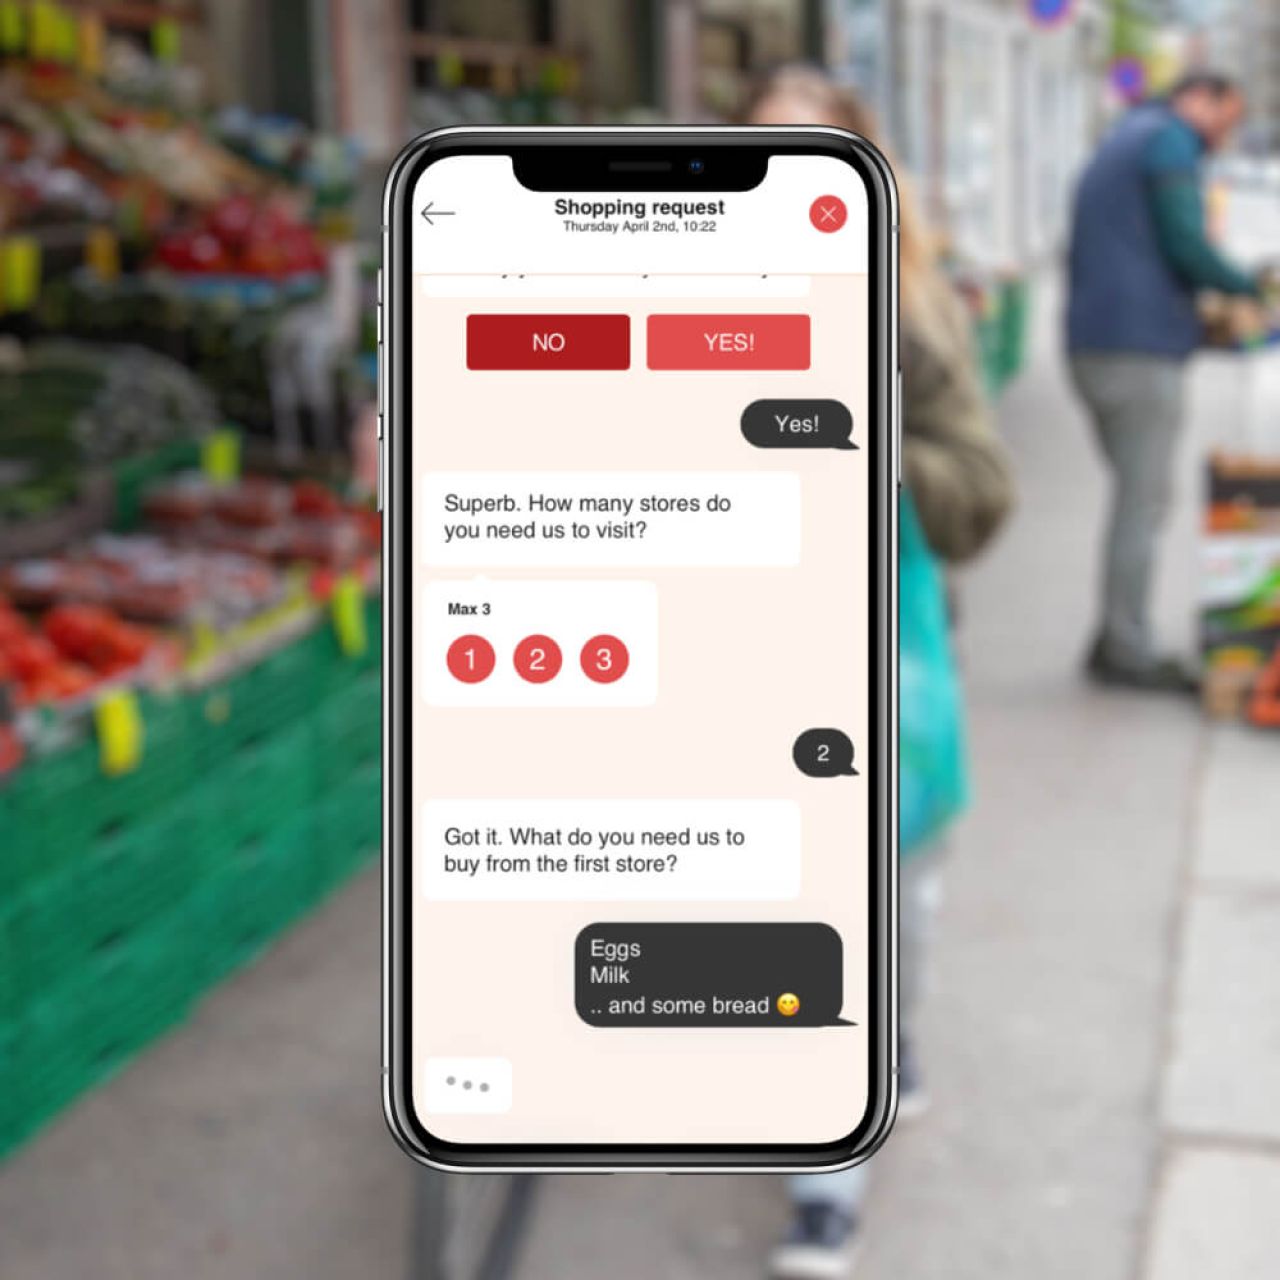 Norwegian Delivery Service App - Shopping request